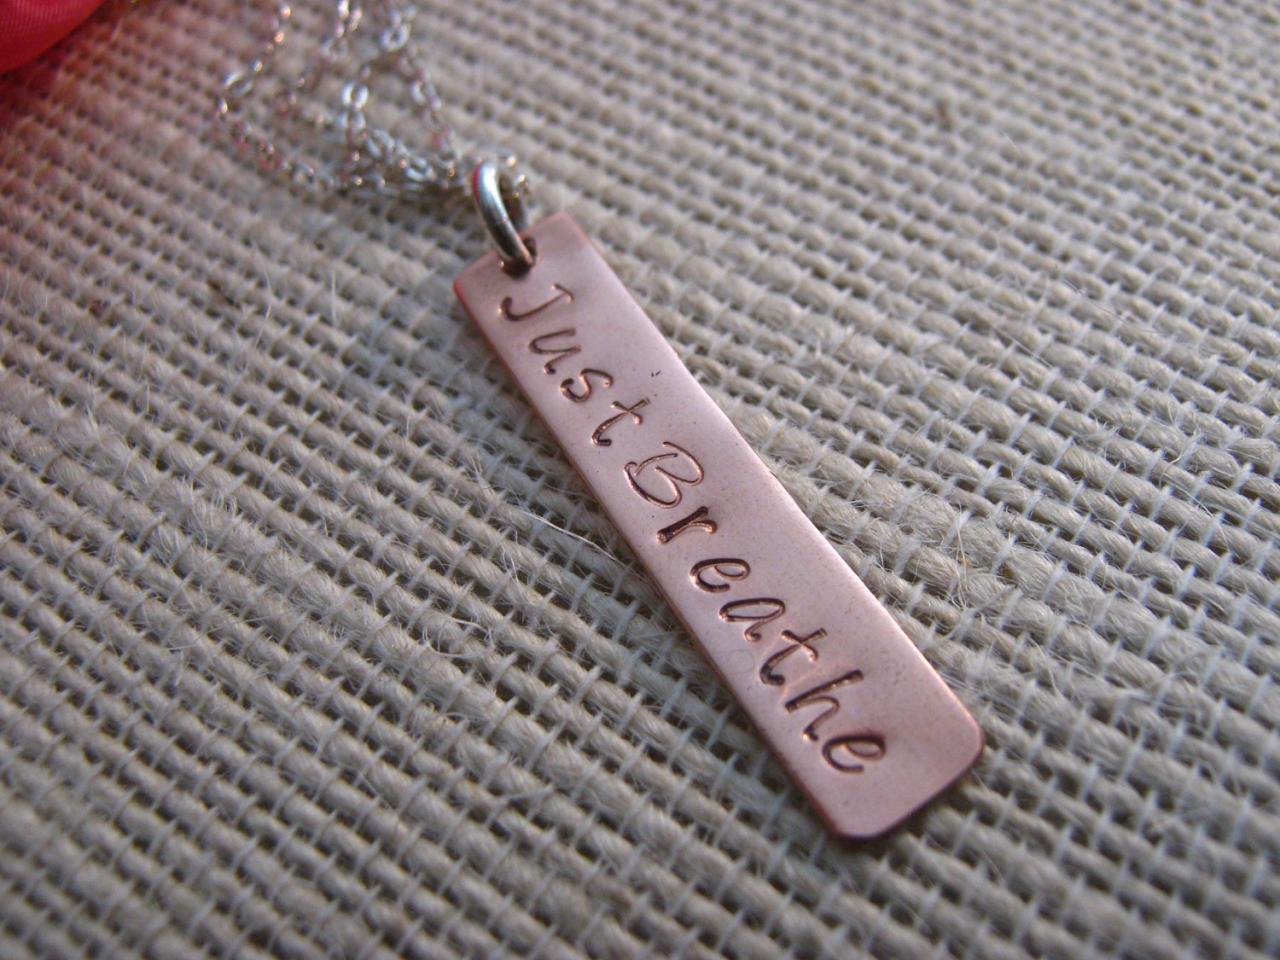 Just Breathe, Personalized Necklace, Just Breath Necklace, Runner's Necklace, Just Breathe Necklace, Yoga Necklace, Personalized Jewelry